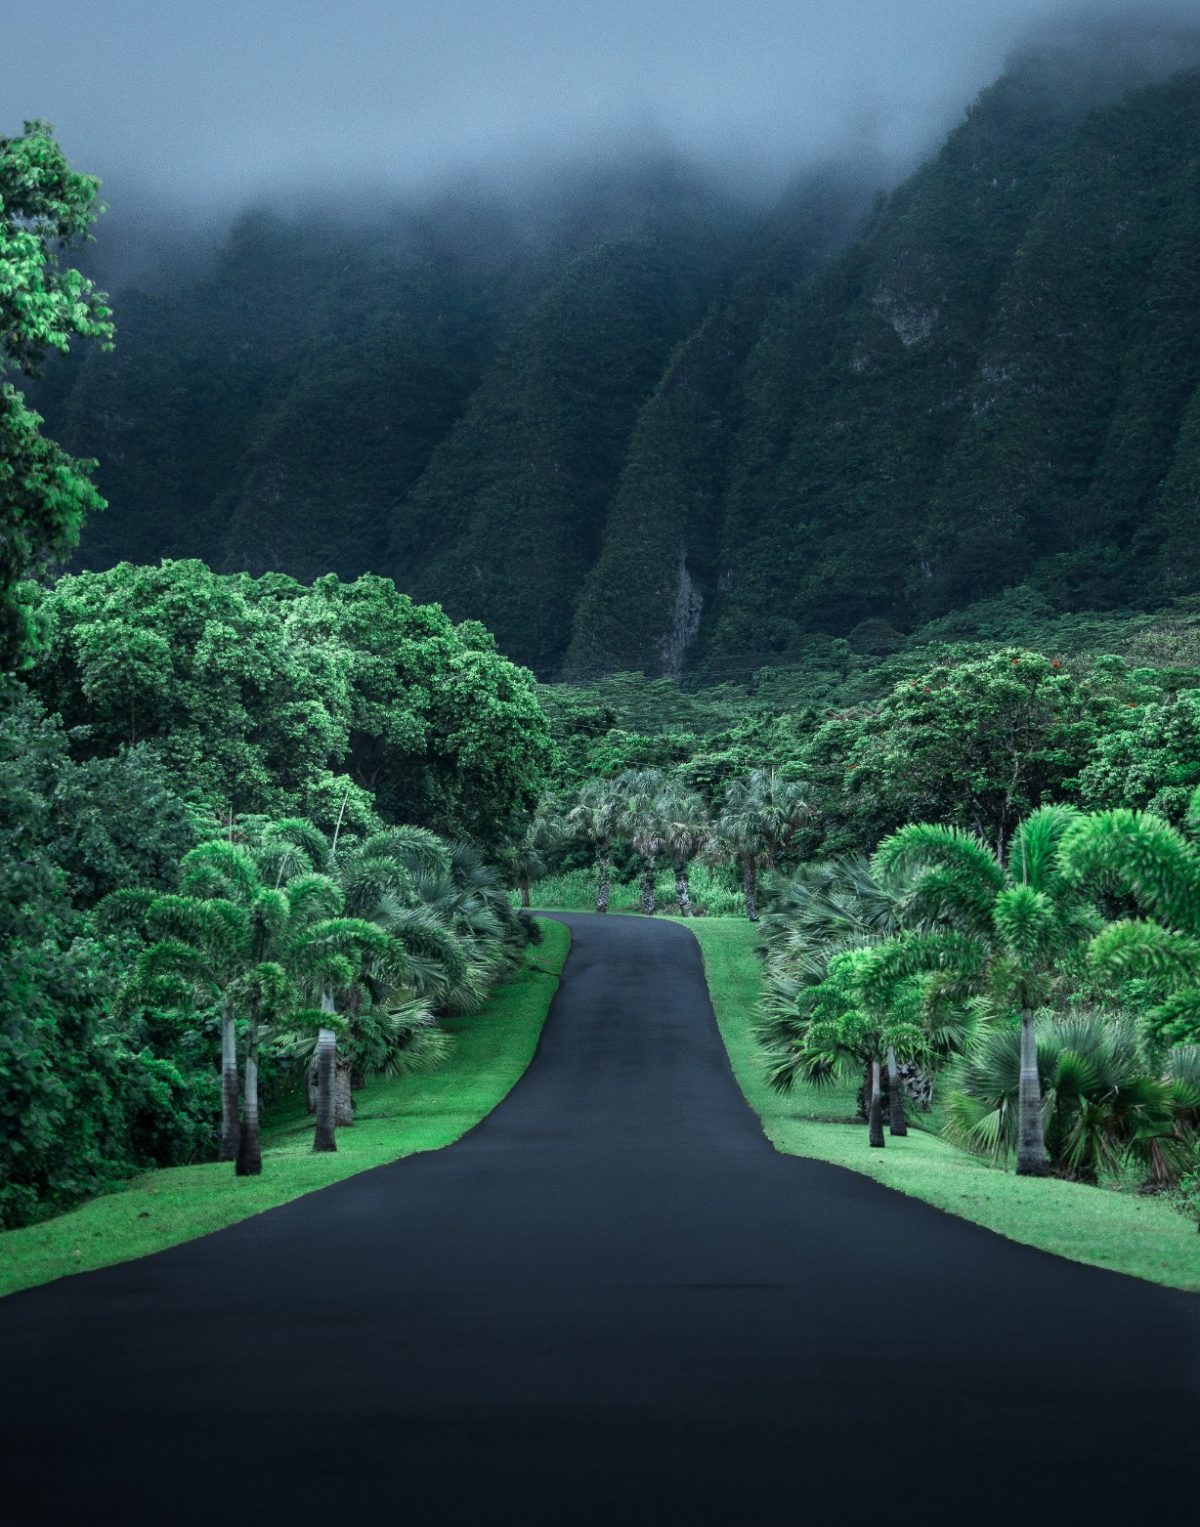 An asphalt road cuts through lush, vibrant green trees and vegetation, stretching into the distance where steep mountains and dark clouds rise into the sky.